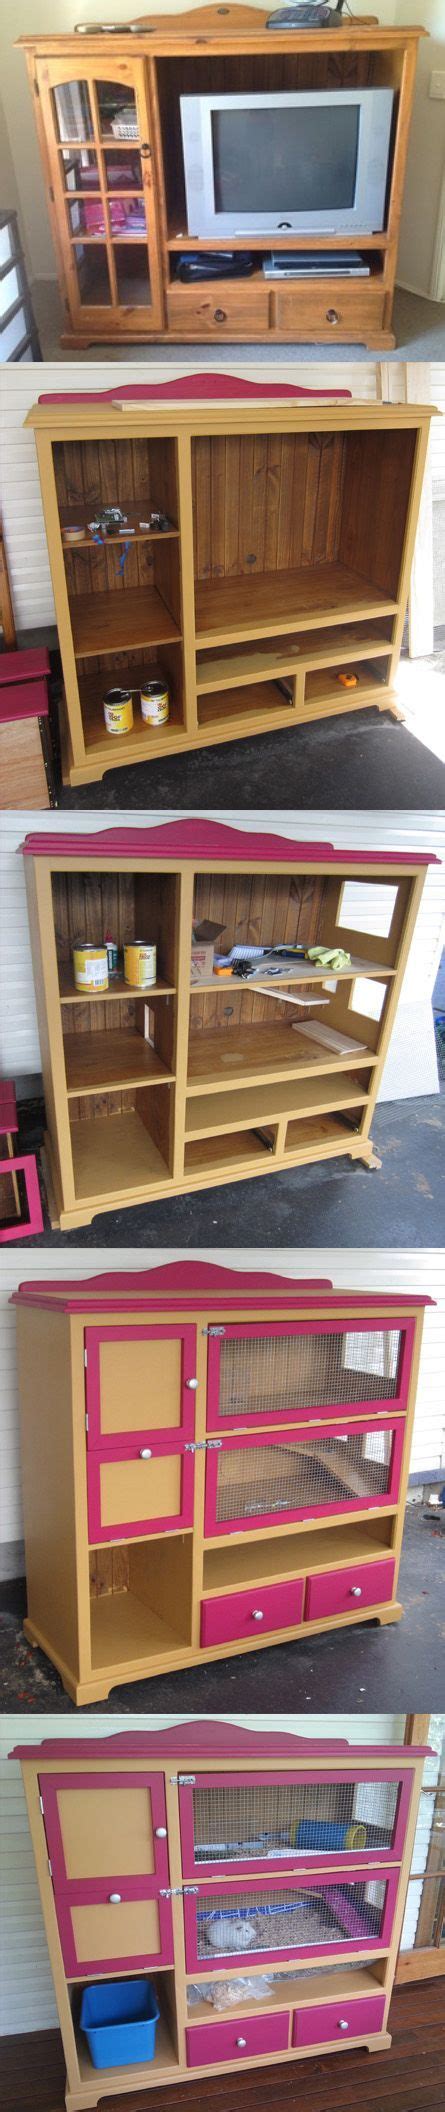 Diy rabbit hutch for our indoor rabbits! 10 DIY Rabbit Hutches From Upcycled Furniture | Home ...